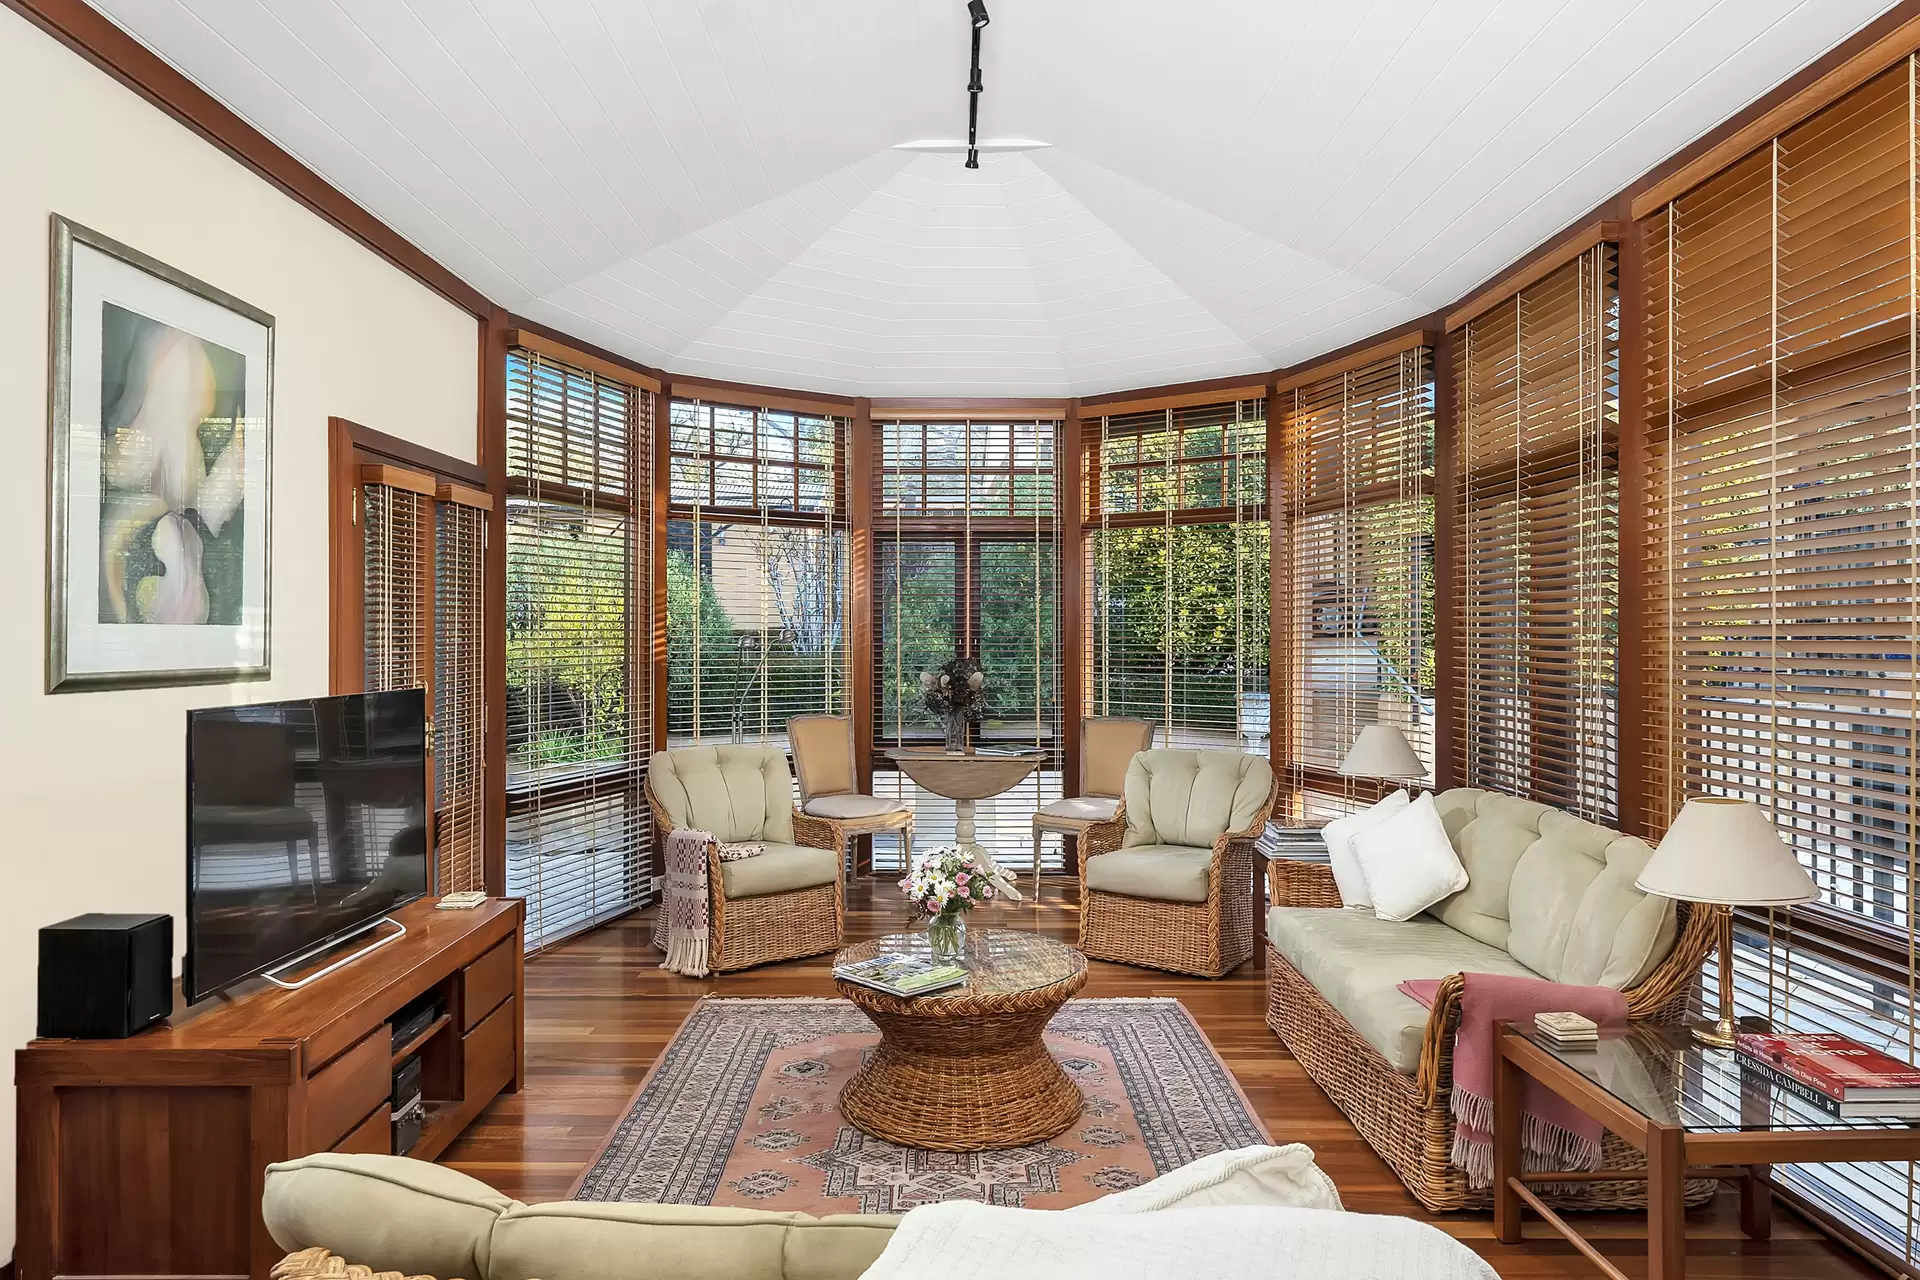 Photo #12: 38 Centennial Road, Bowral - Sold by Drew Lindsay Sotheby's International Realty